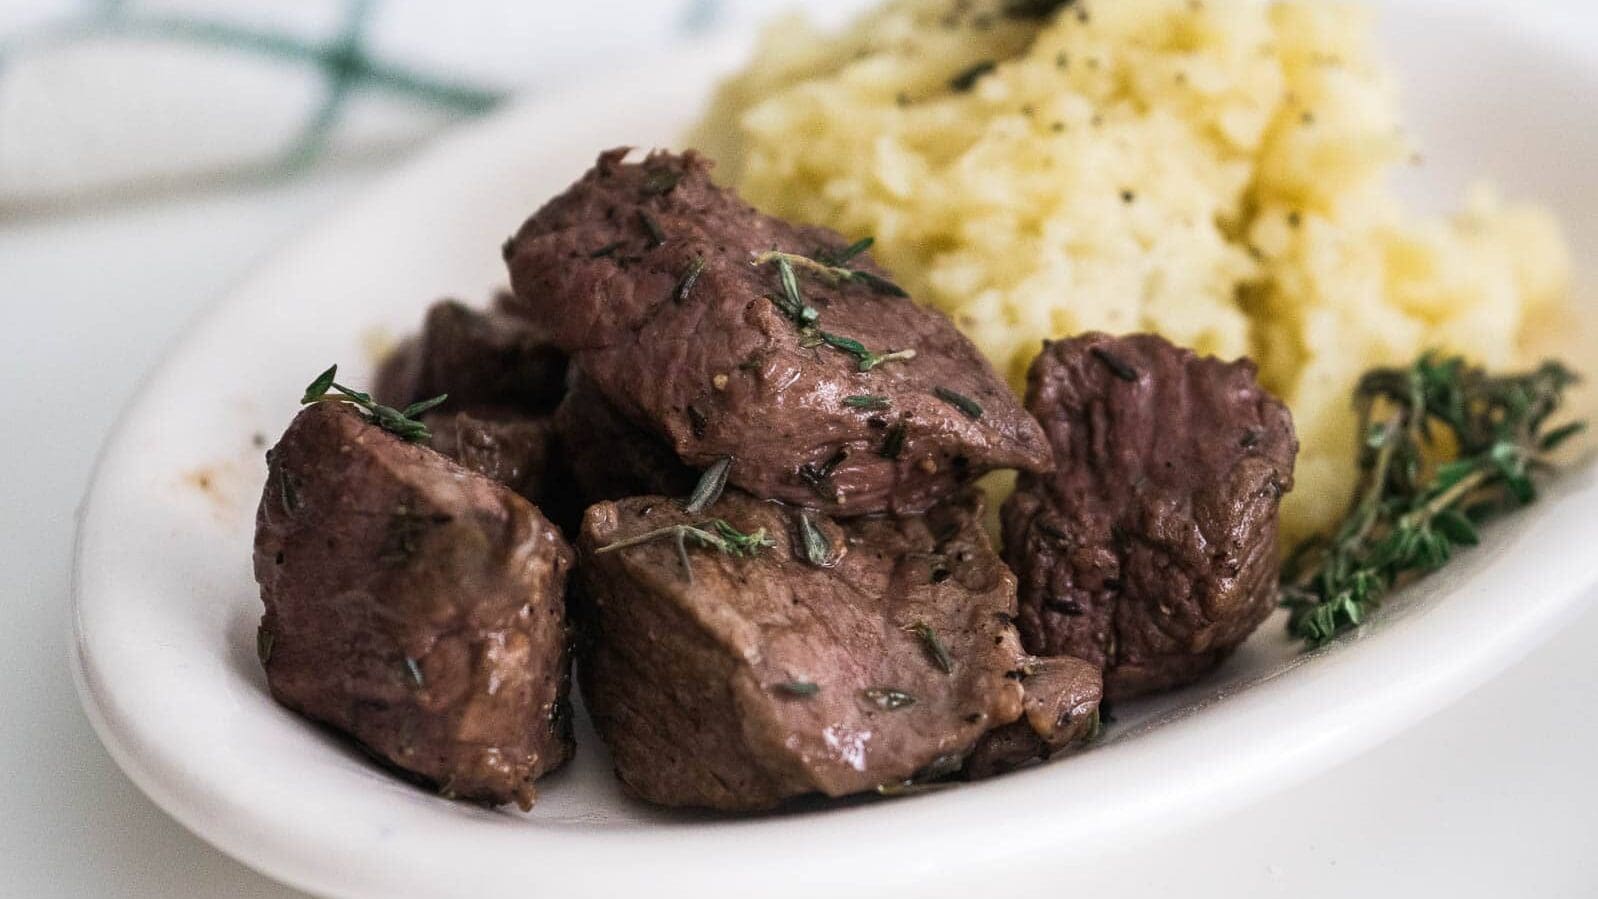 steak bites on a plate with potatoes